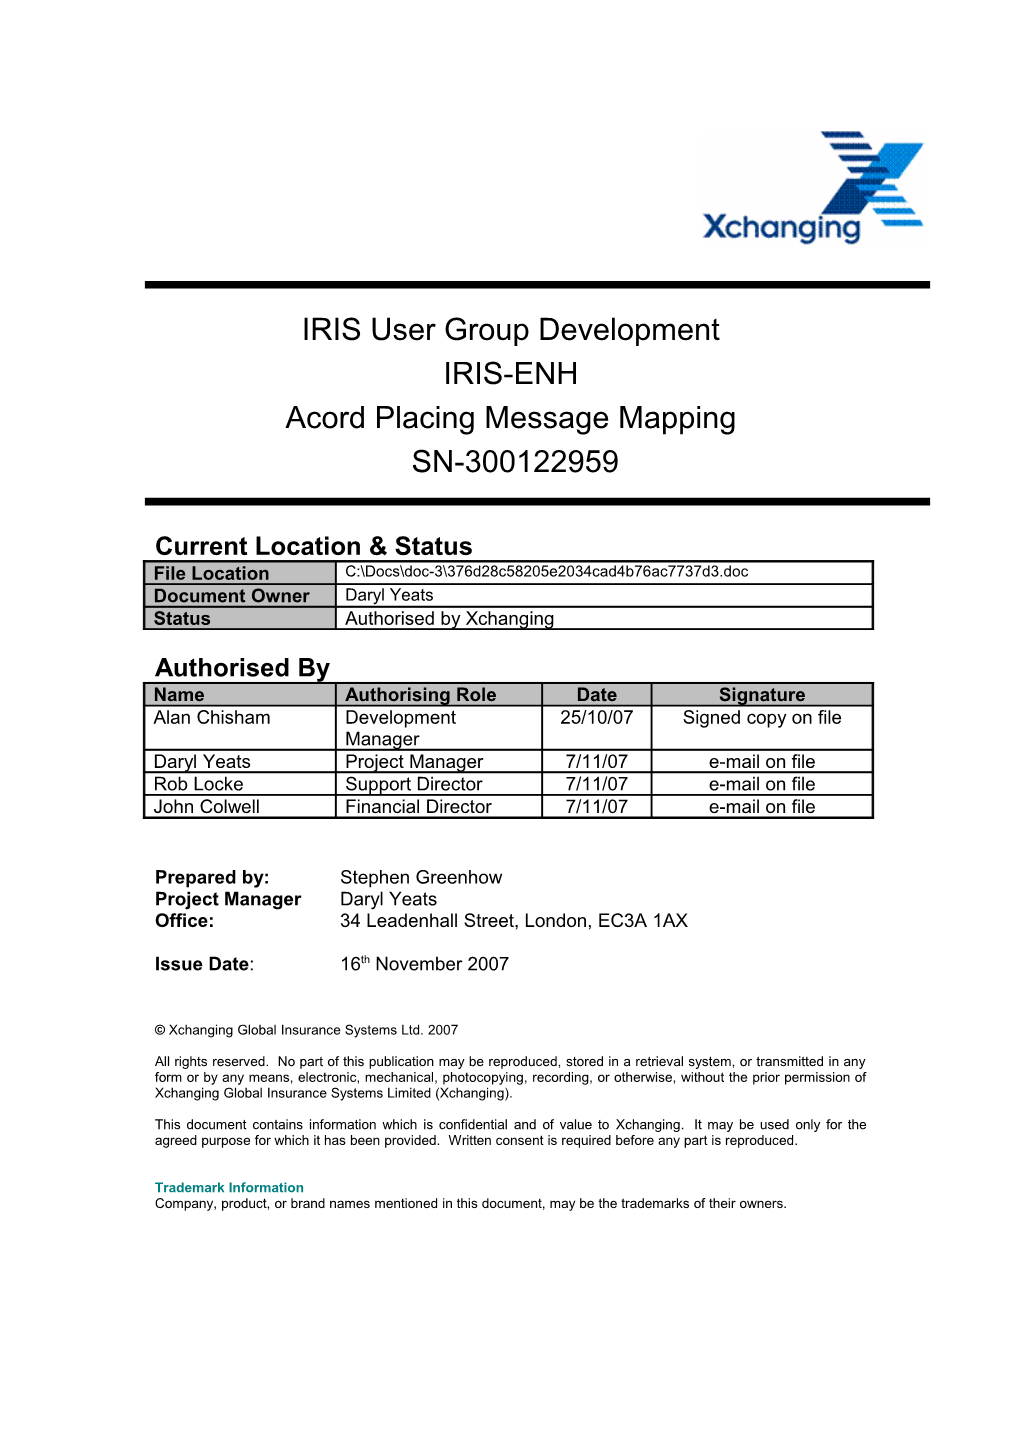 Acord Placing Message Mapping